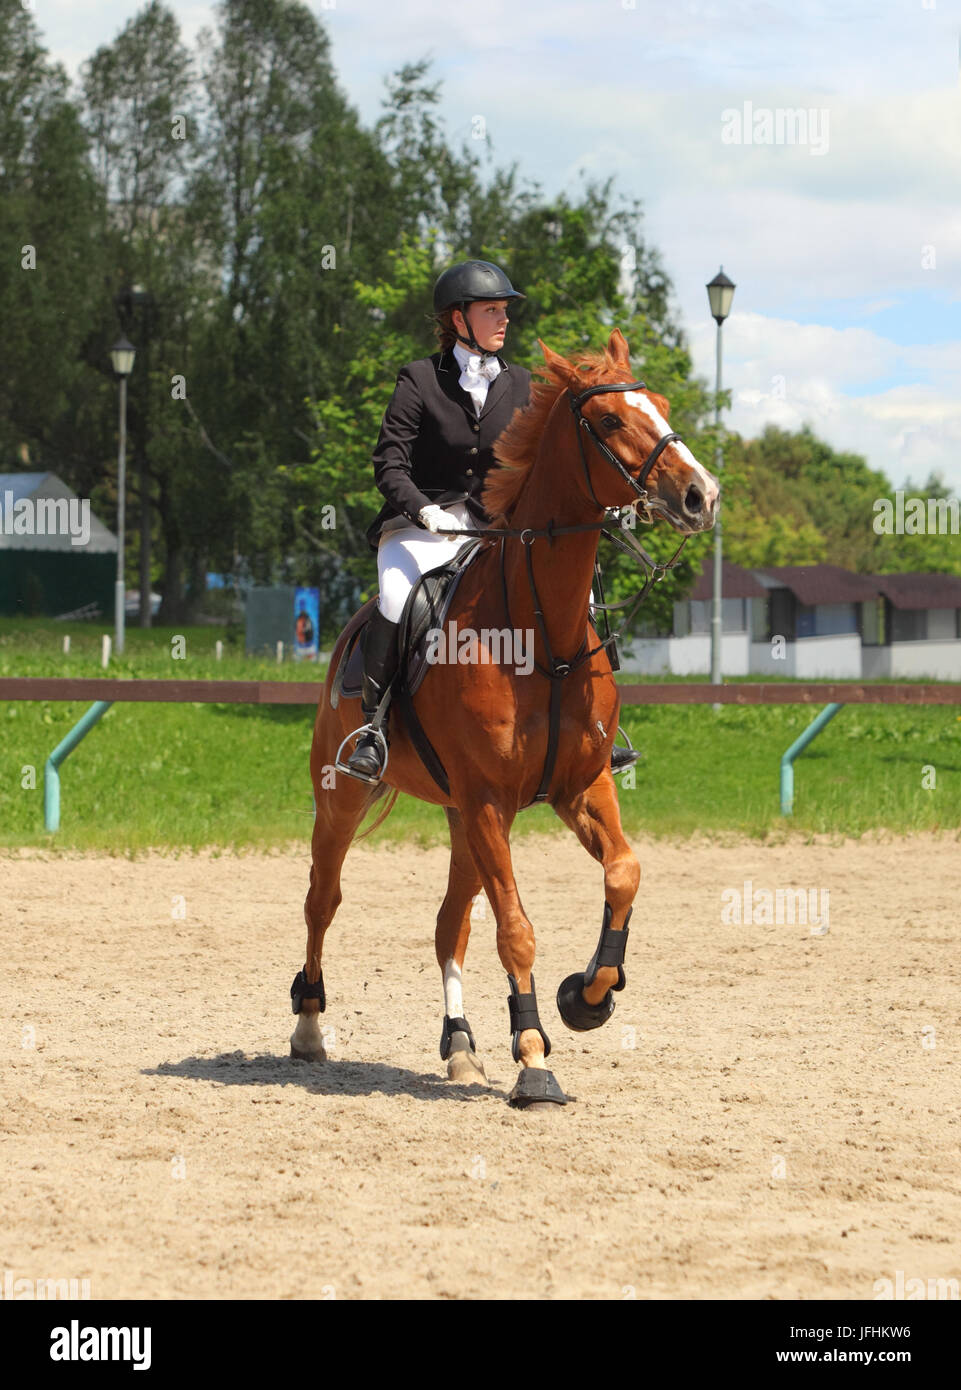 Rider and their horse take part in a local riding club dressage event Stock Photo